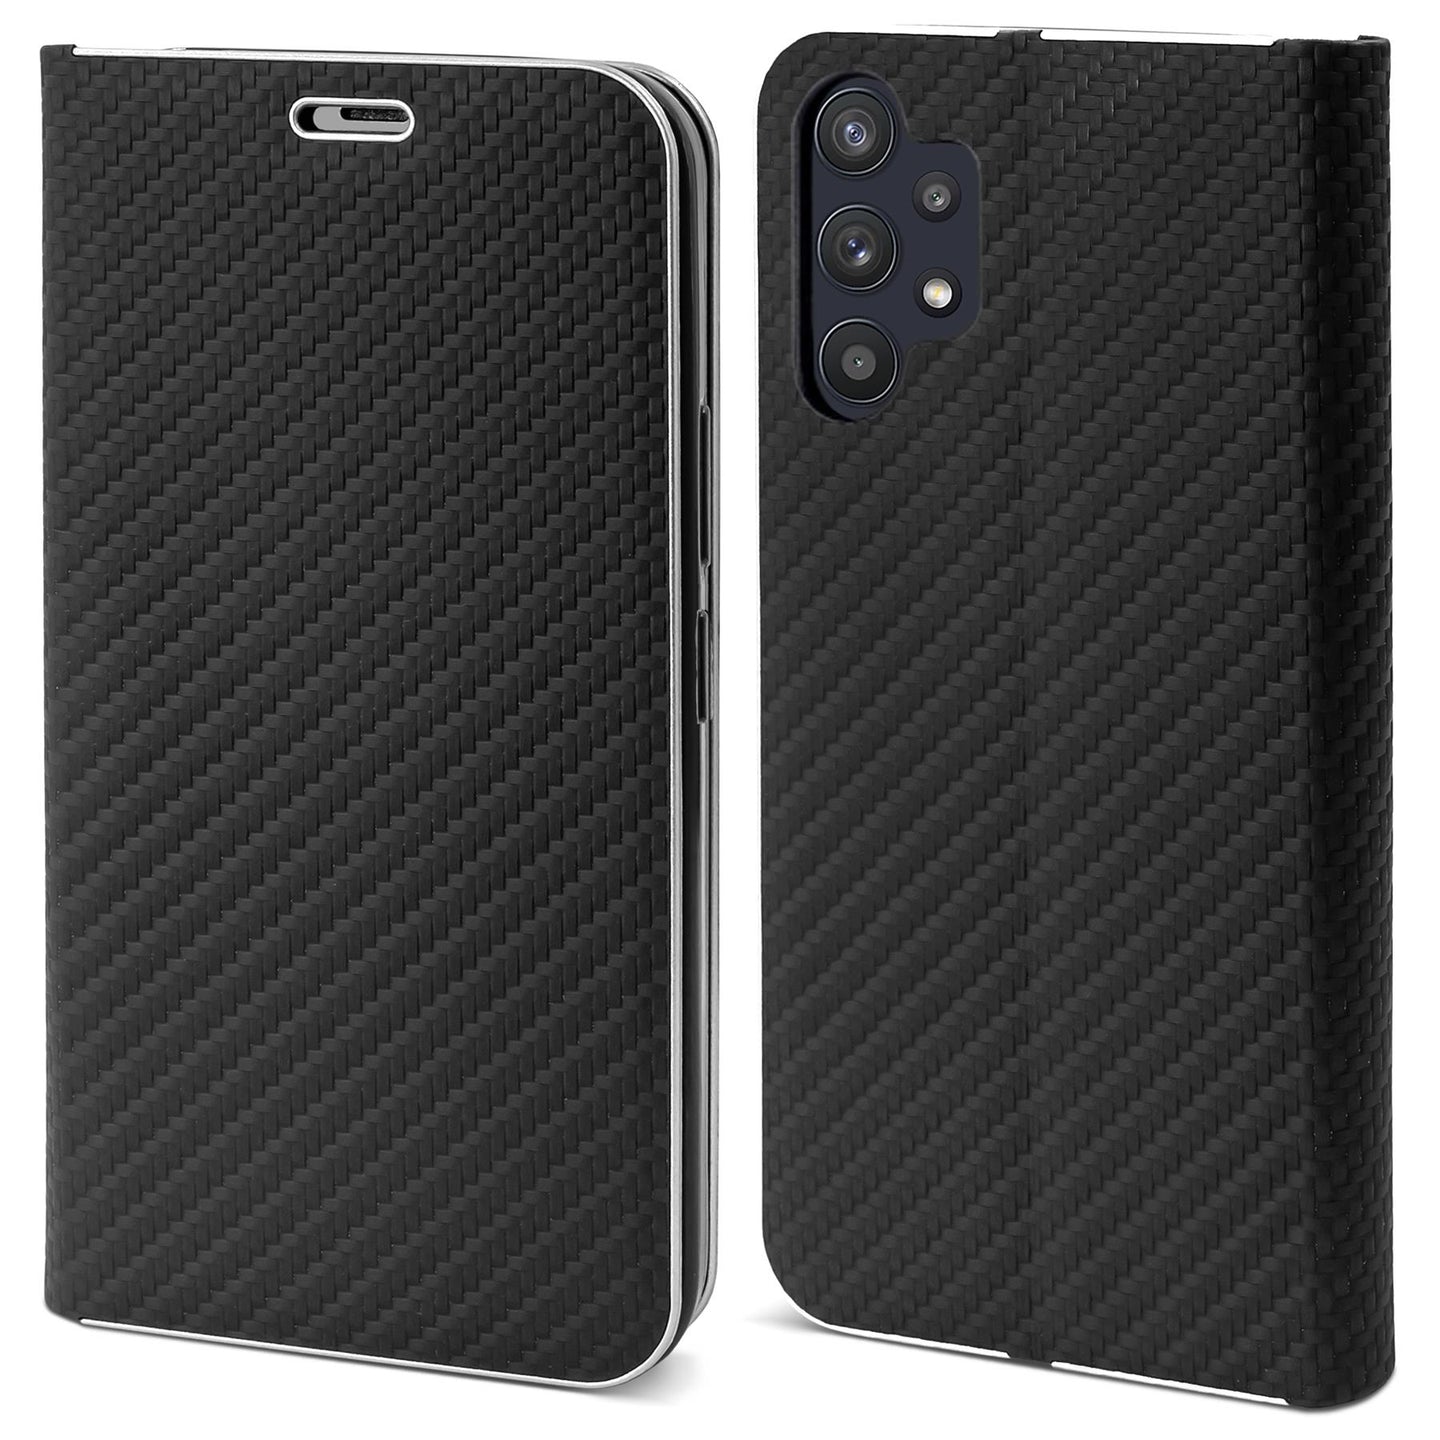 Moozy Wallet Phone Case for Samsung a32 5g, Carbon - Flip Case with Metallic Border Design Magnetic Closure Flip Cover with Card Holder and Kickstand Function, Black